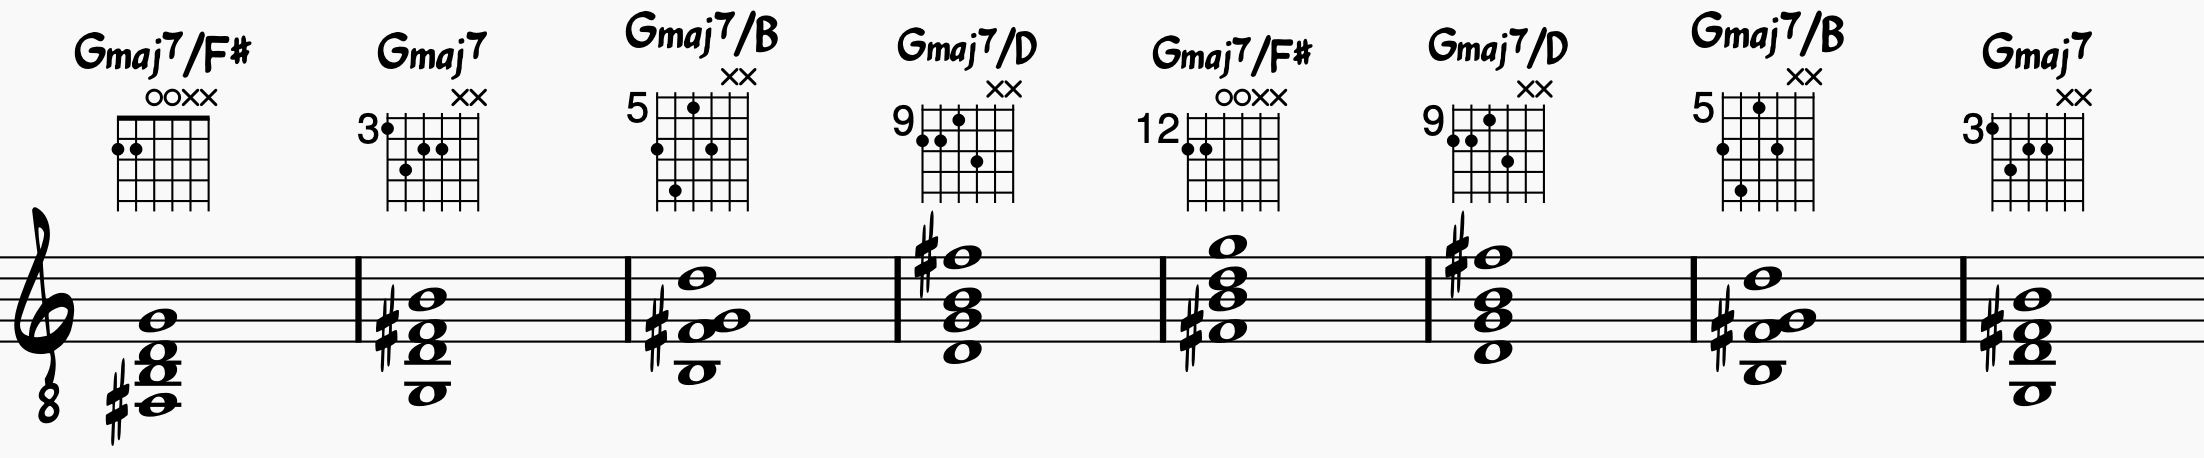 Major chord switching exercises using whole notes; 7th chords and inversions